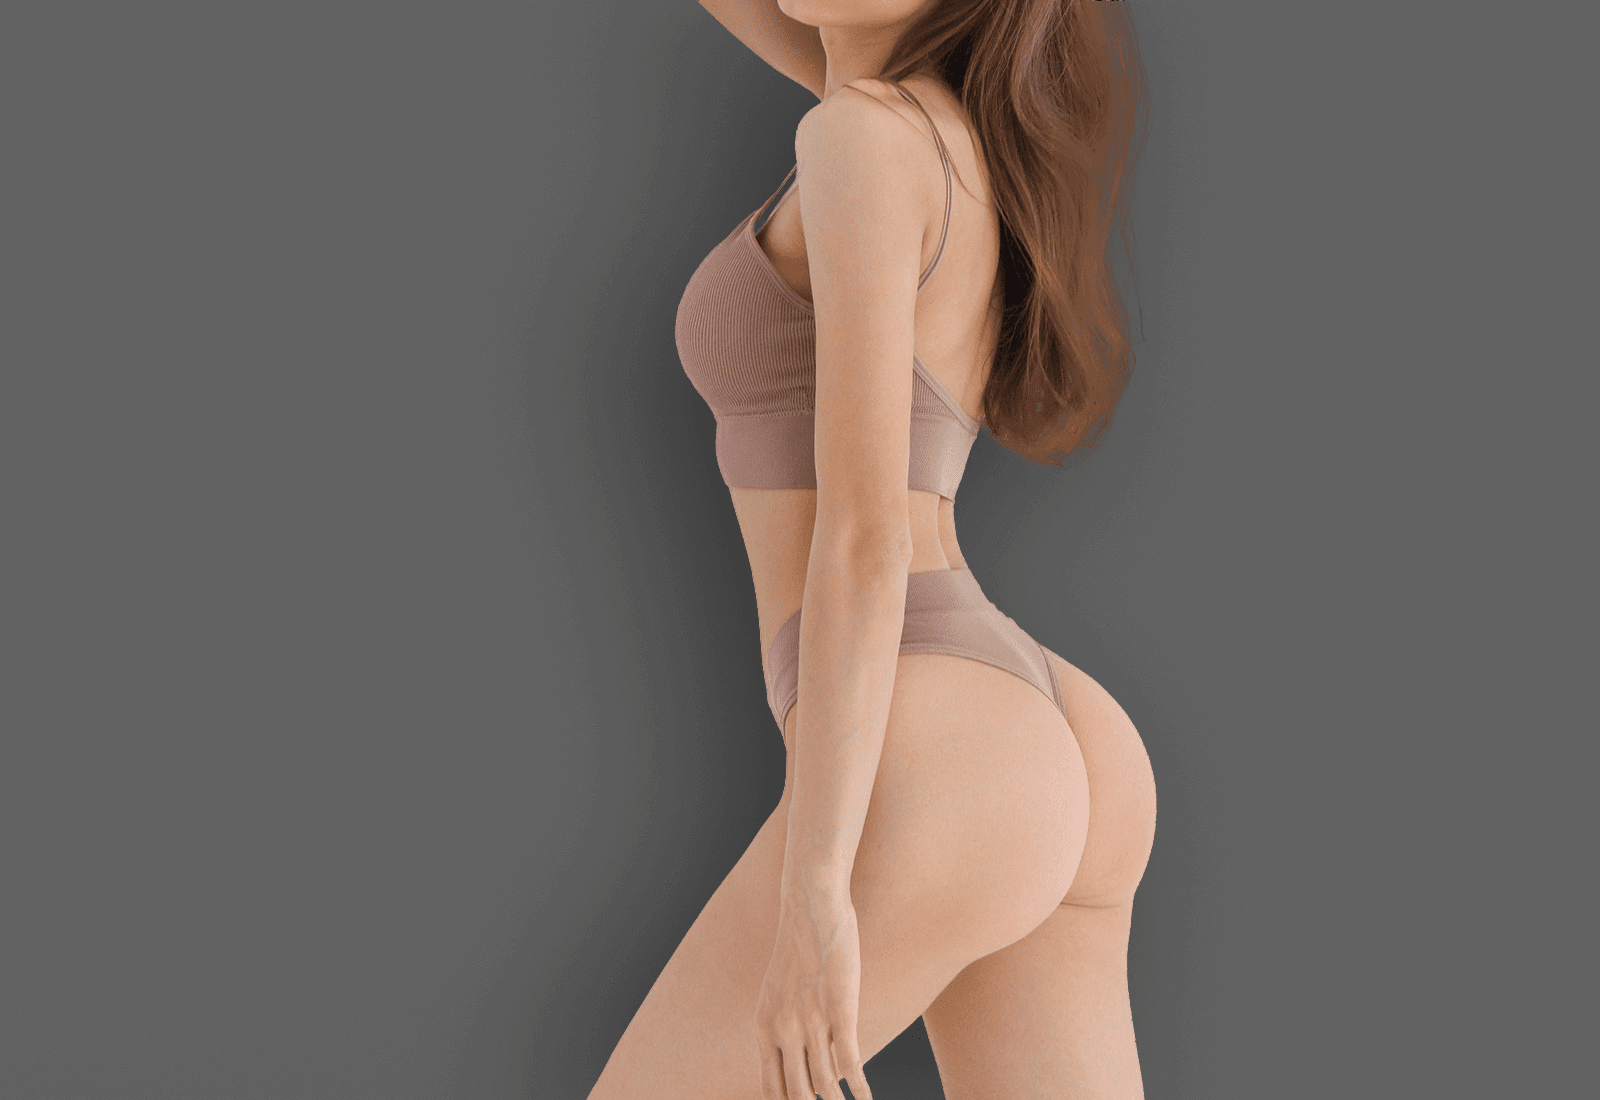 Torso of a curvy woman in her undergarments - mobile version